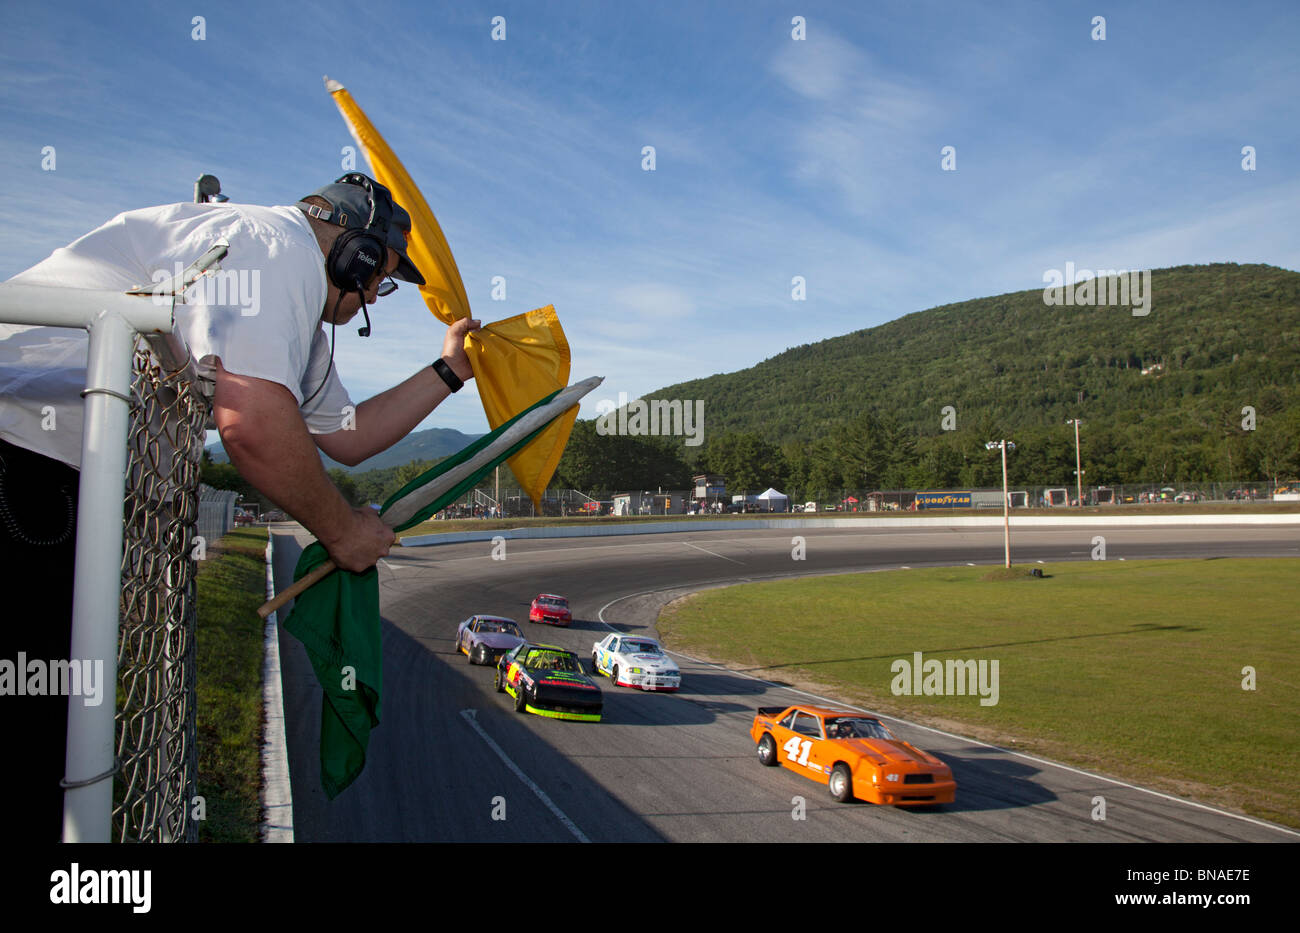 Woodstock, New Hampshire - The flagman waves signal flags during stock car racing at White Mountain Motorsports Park. Stock Photo